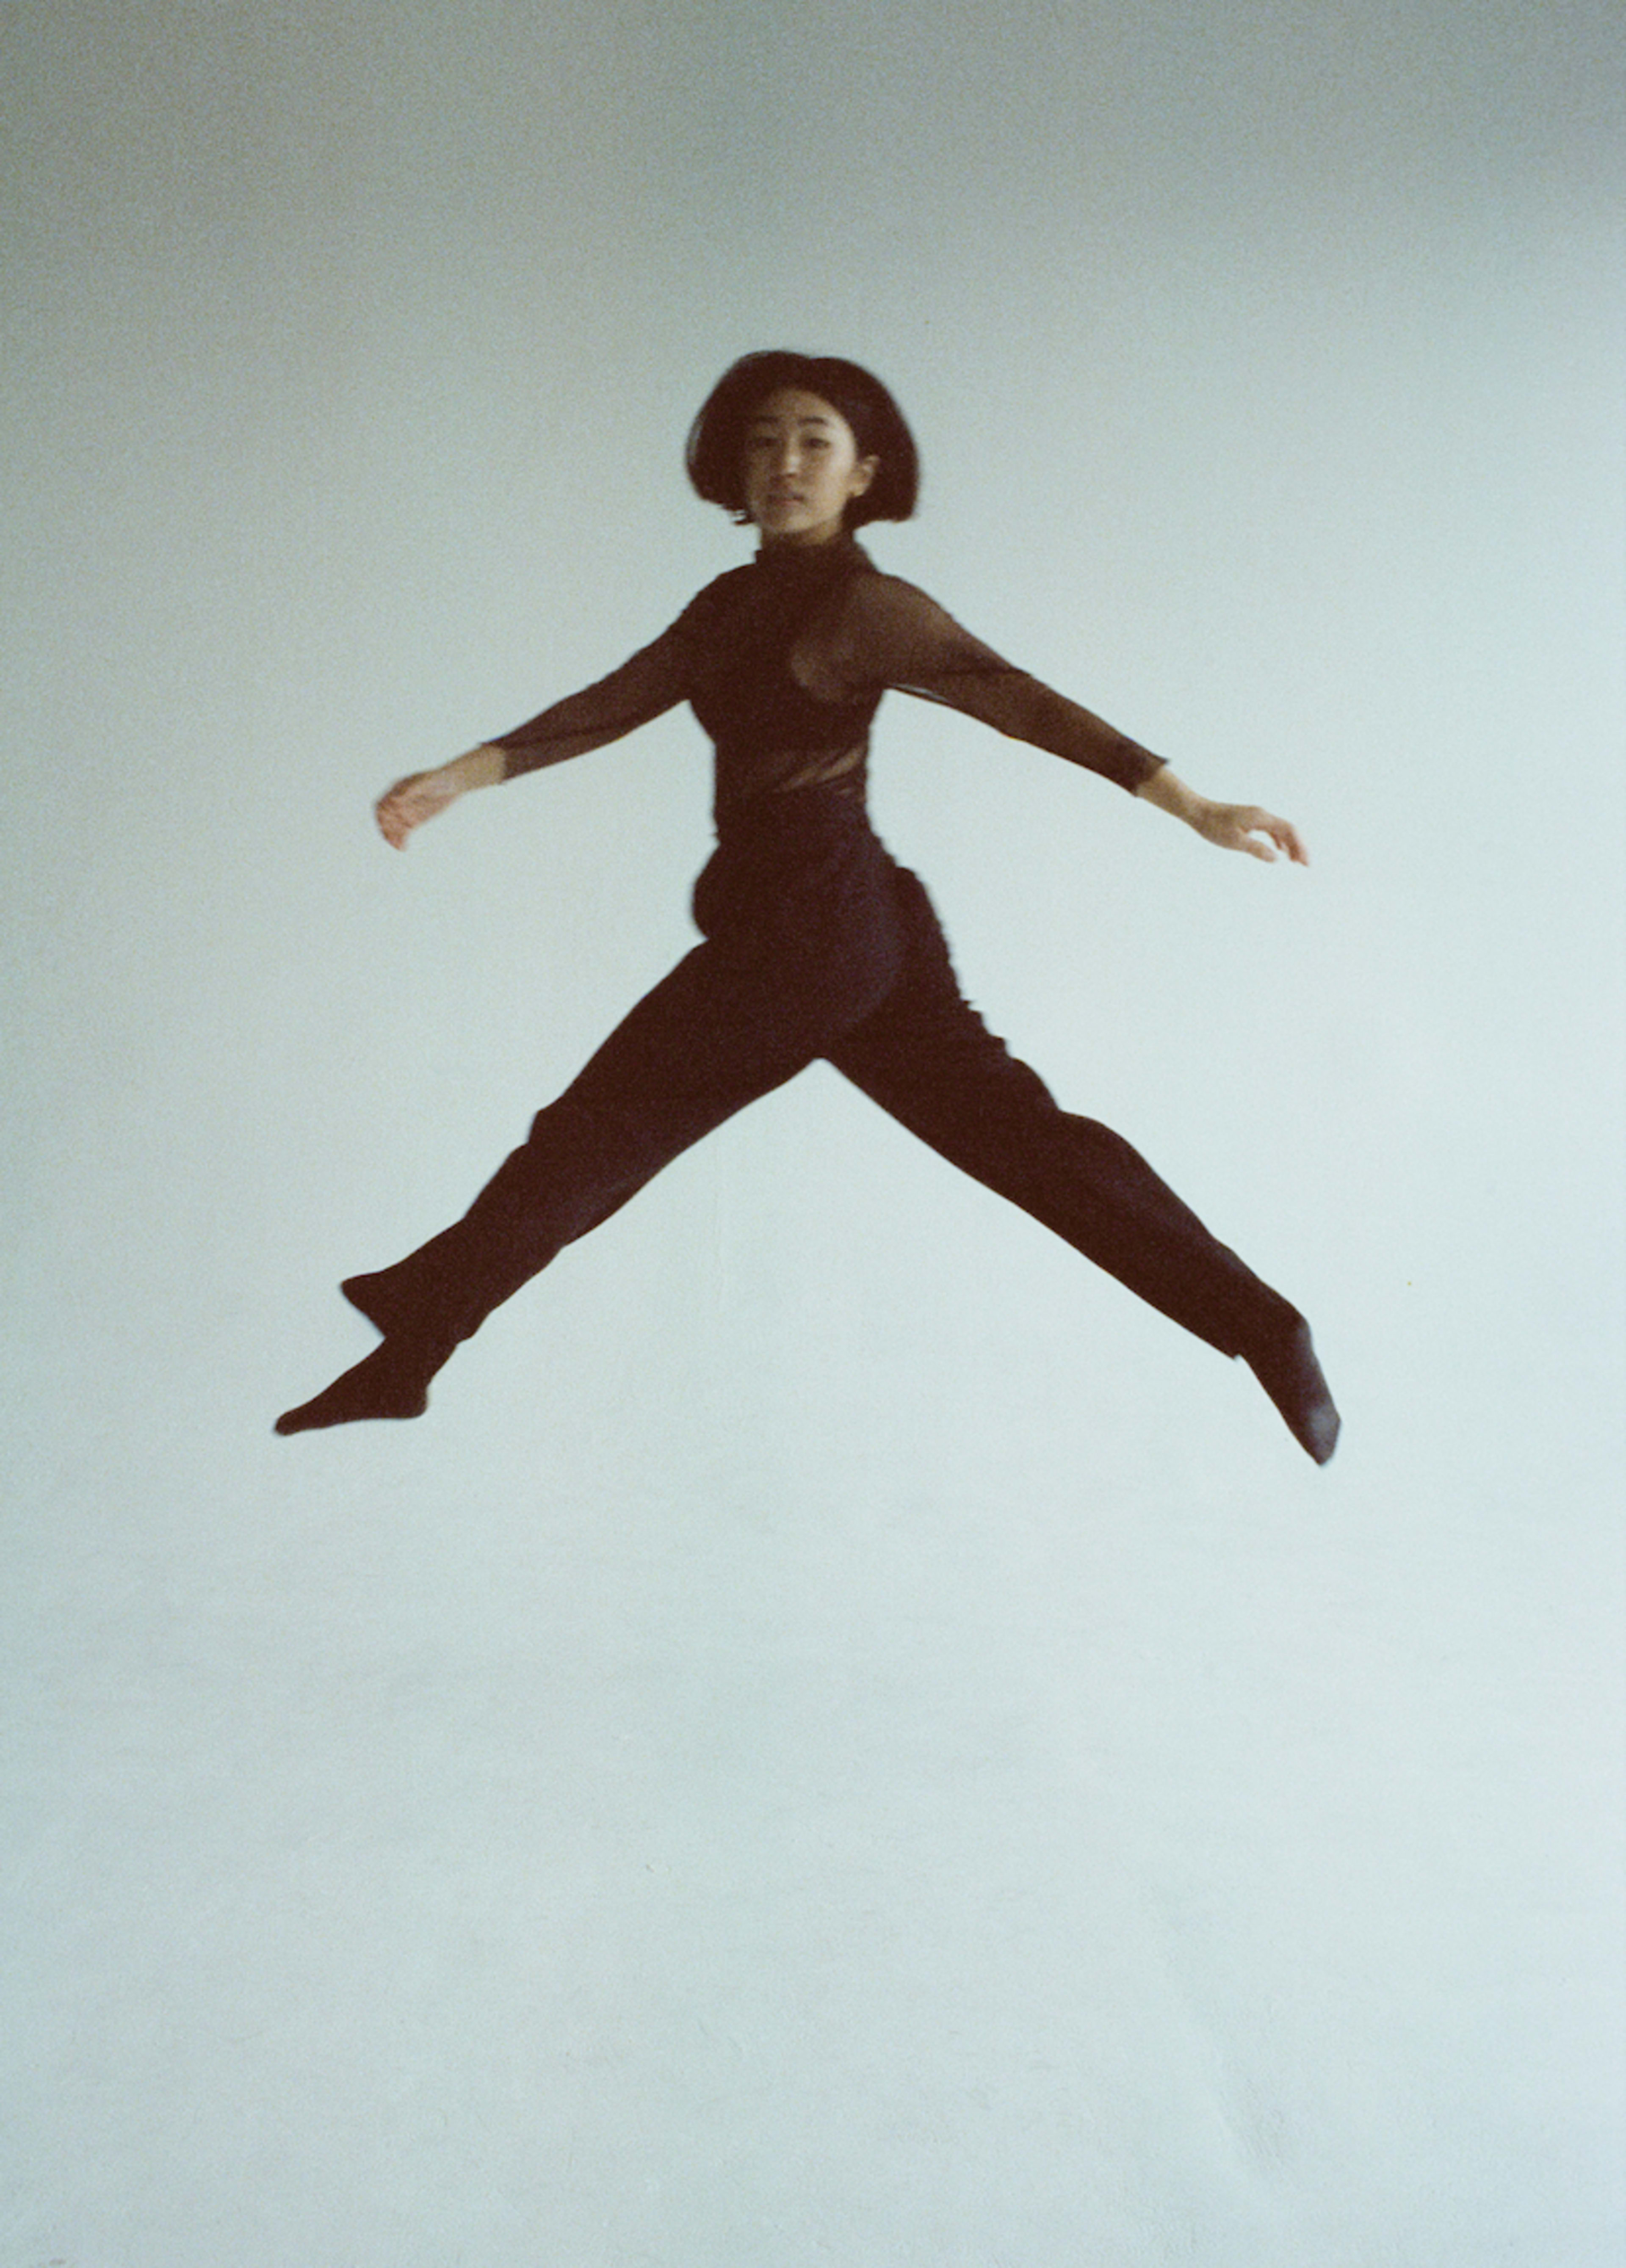 A woman in a black outfit is jumping during a photo shoot.